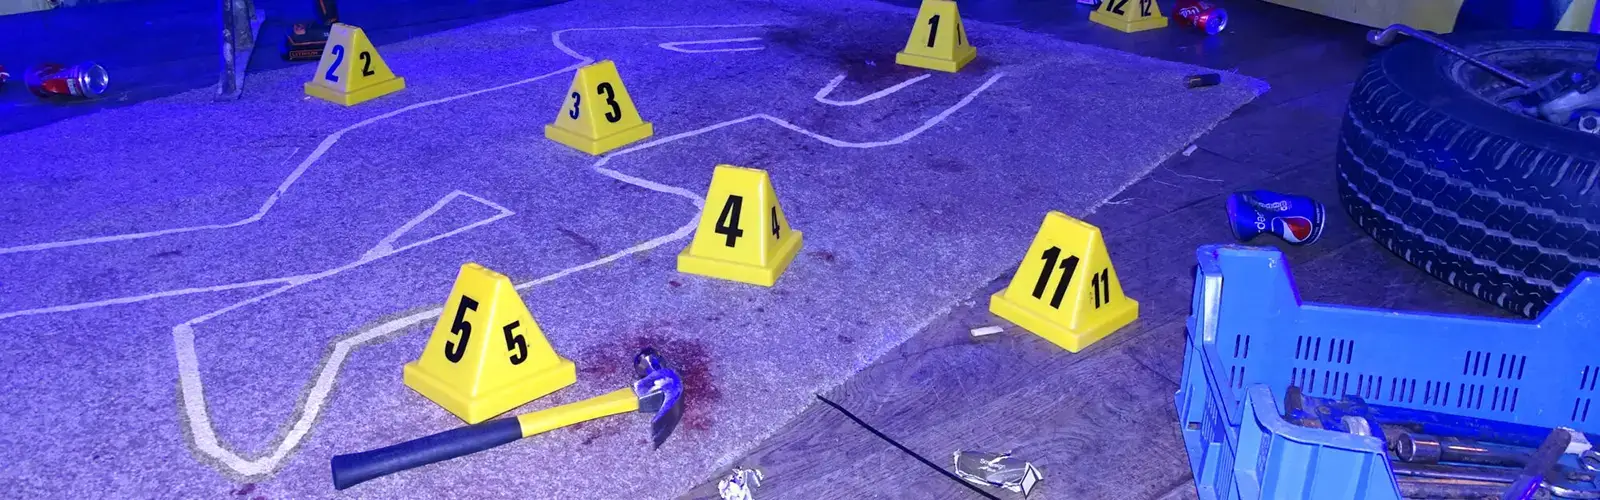 Crime scene with evidence on the floor team building challenge